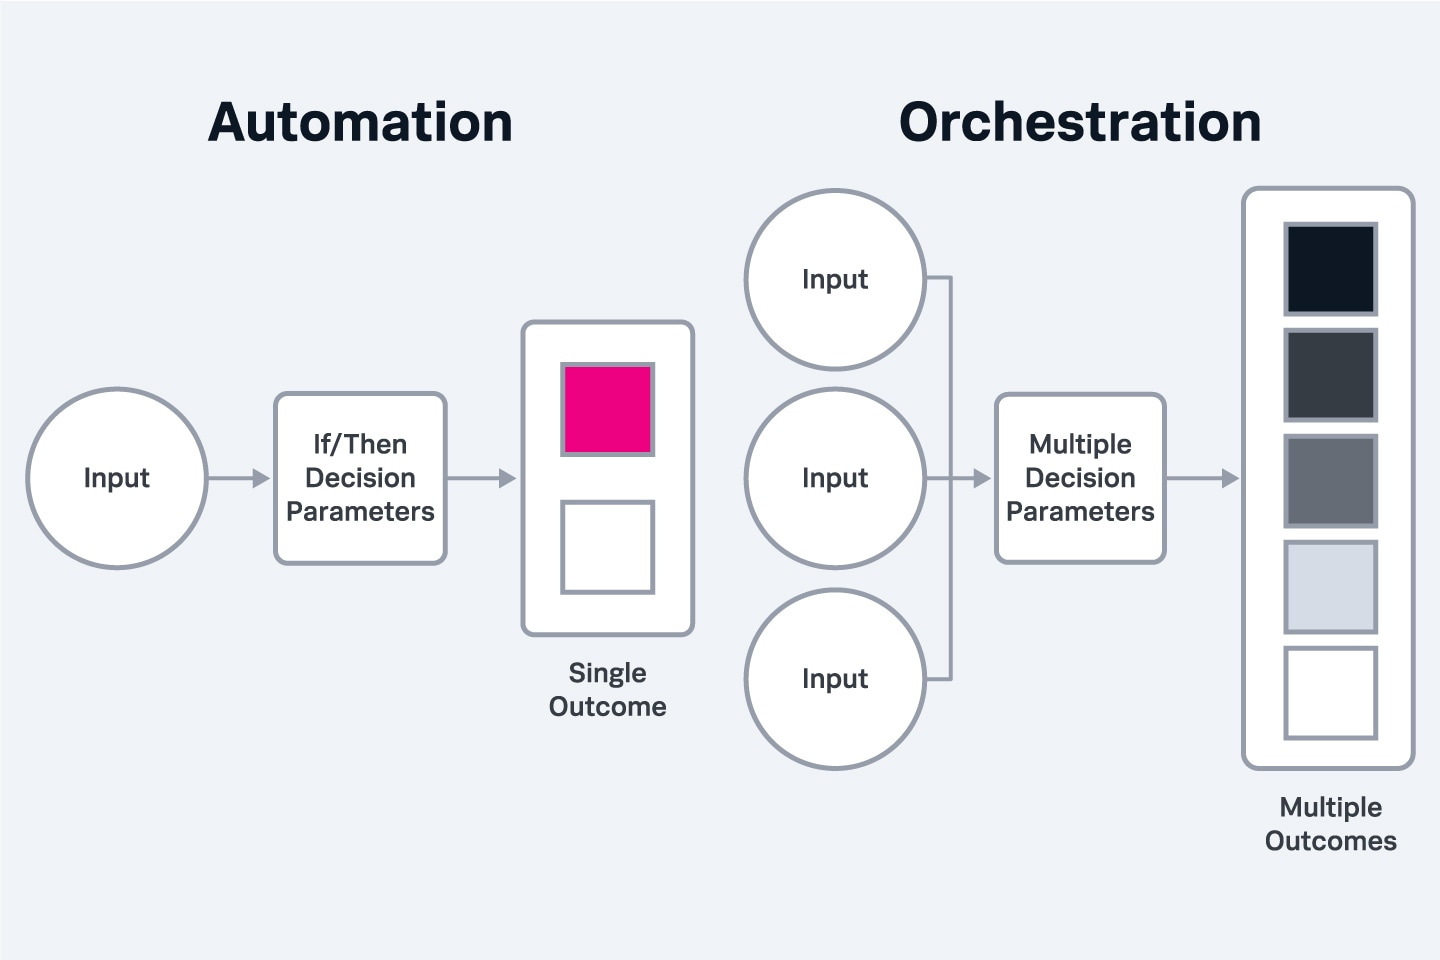 Diagram comparing automation and orchestration.